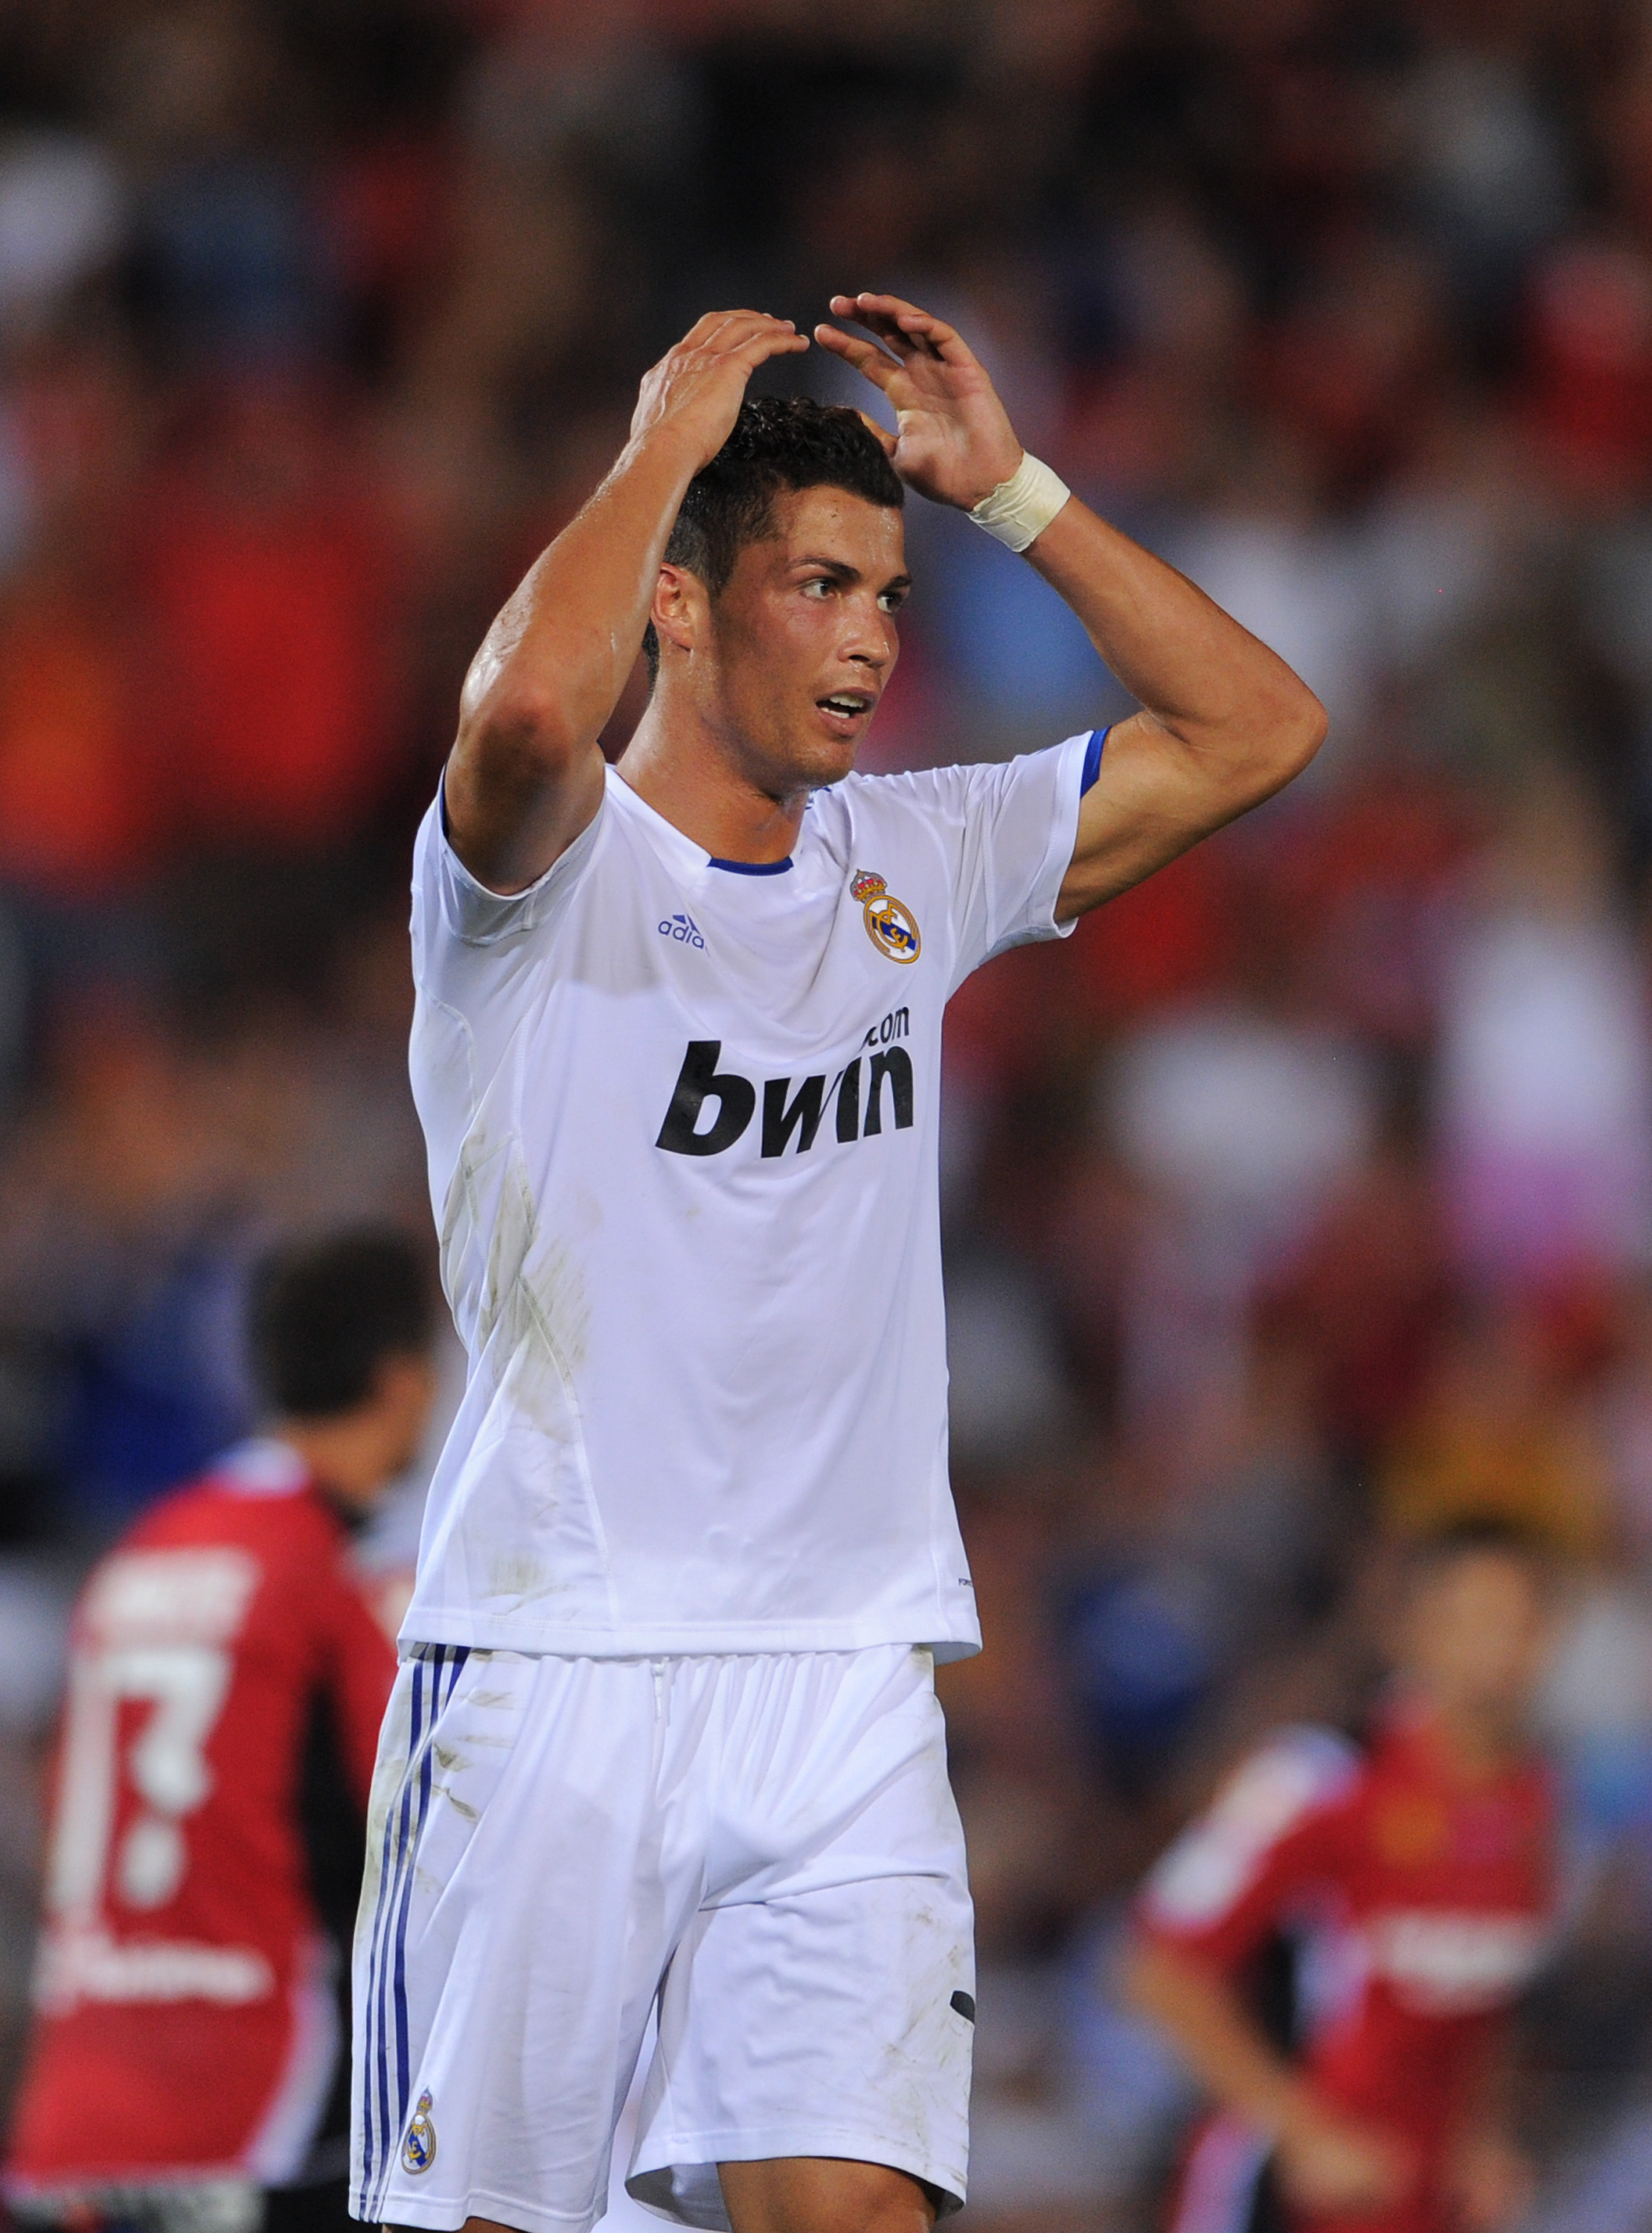 PALMA DE MALLORCA, SPAIN - AUGUST 29:  Cristiano Ronaldo of Real Madrid reacts as he fails to score during the La Liga match between Mallorca and Real Madrid at the ONO Estadio on August 29, 2010 in Palma de Mallorca, Spain. The match ended in a 0-0 draw.